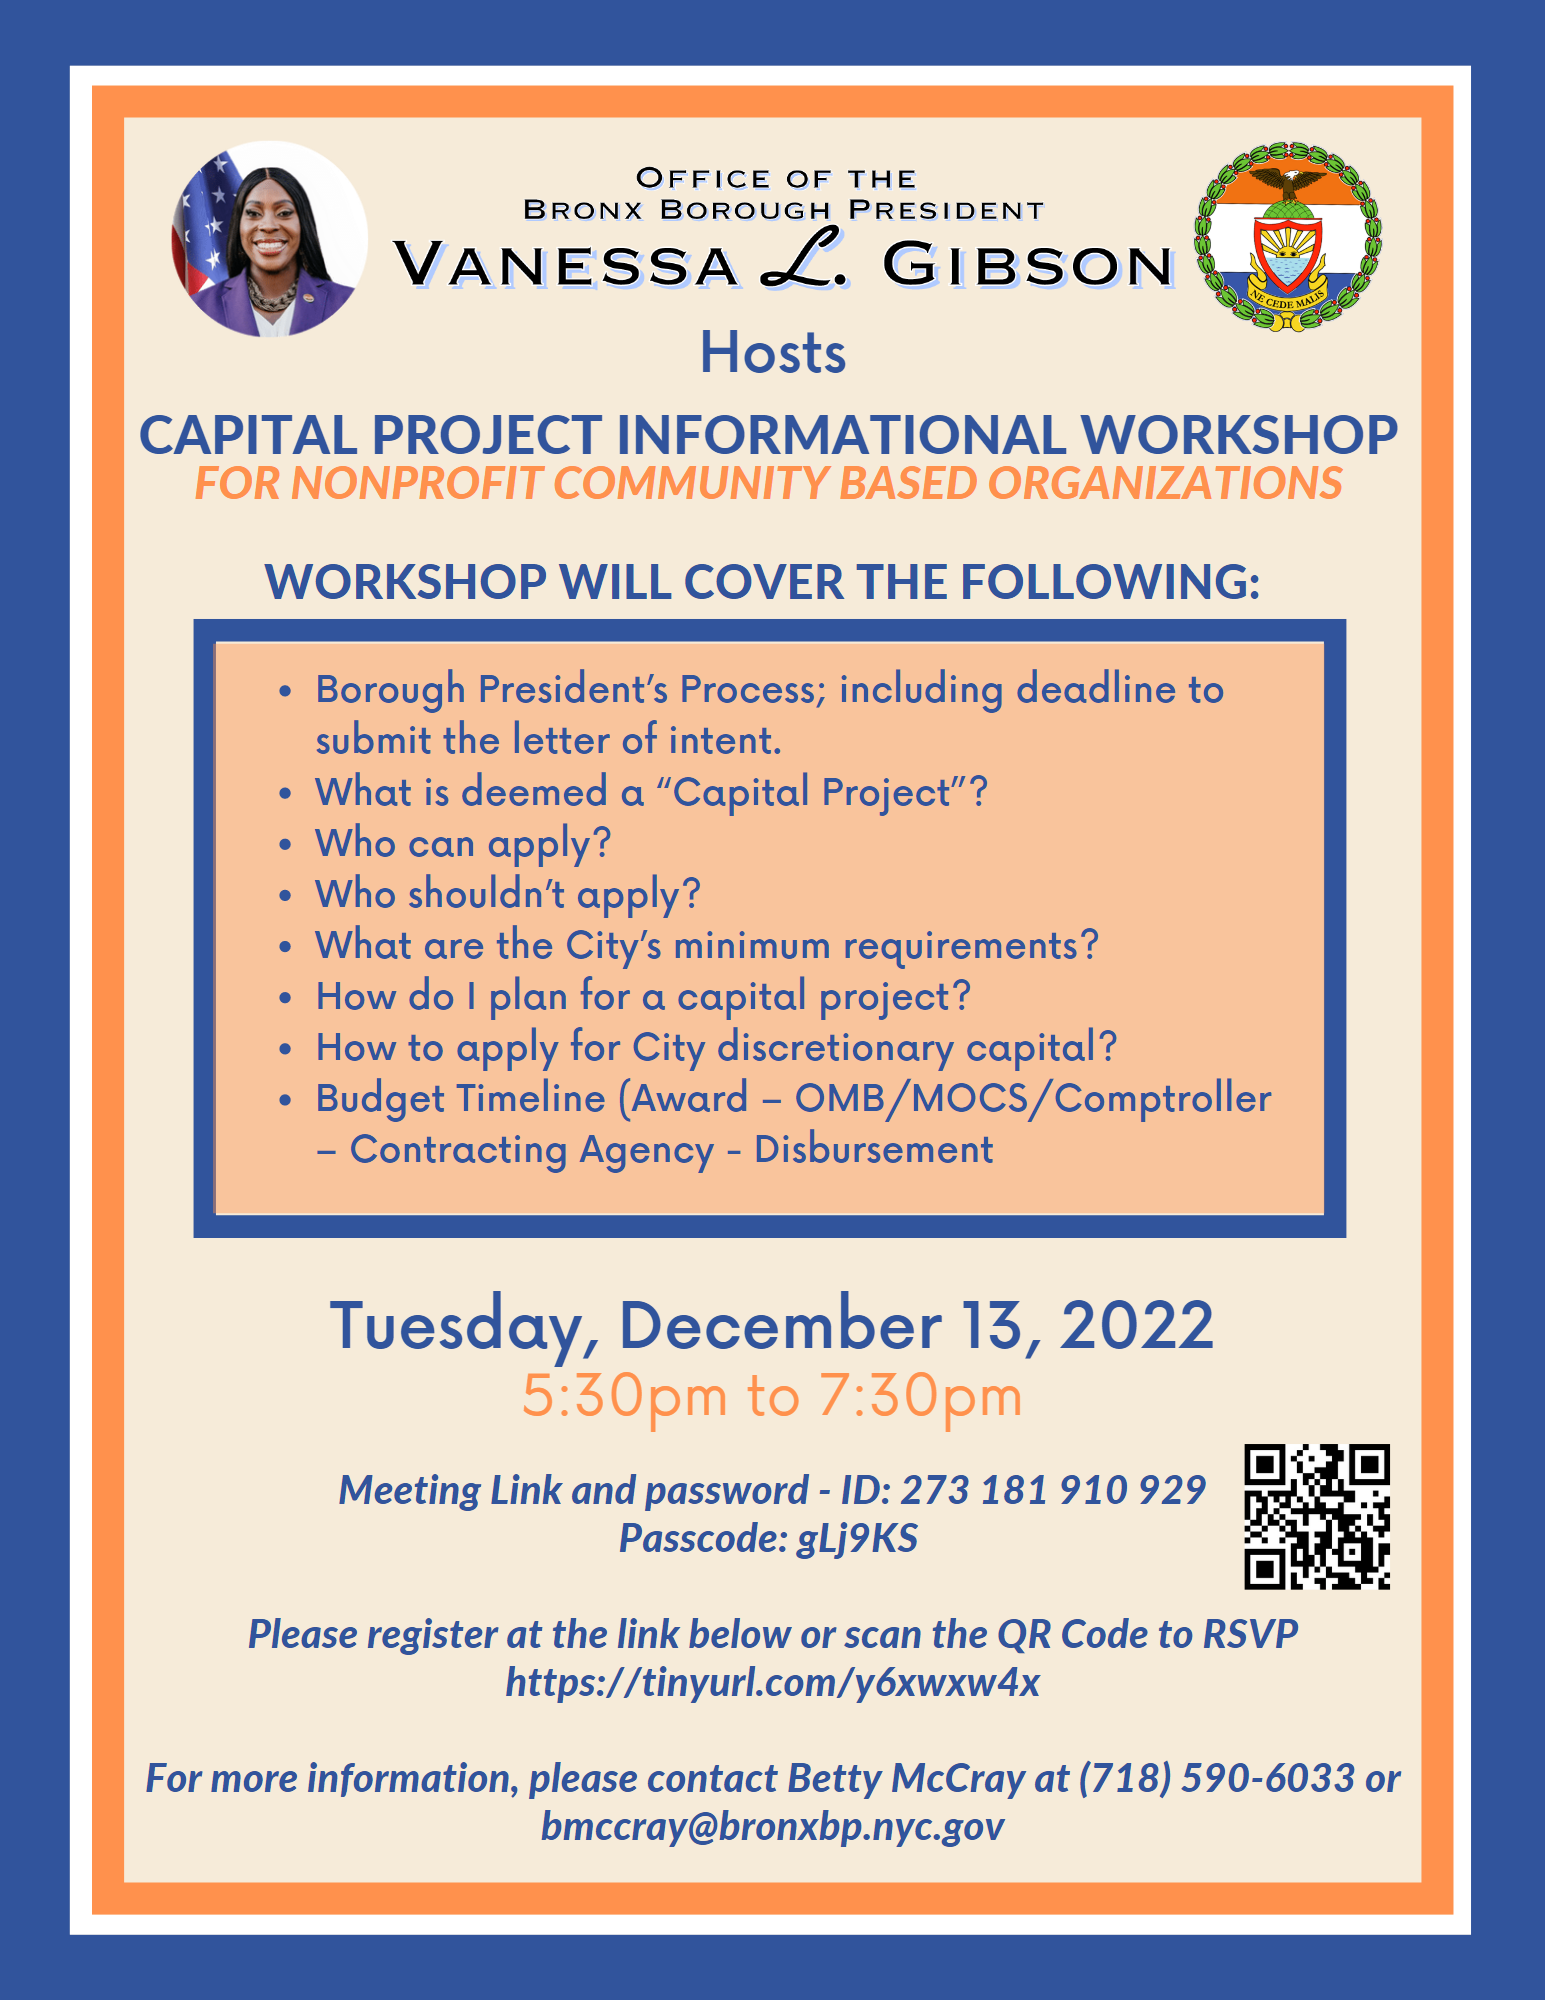 A flyer for a non-profit workshop for capital funding - email bmccray@bronxbp.nyc.gov for full details